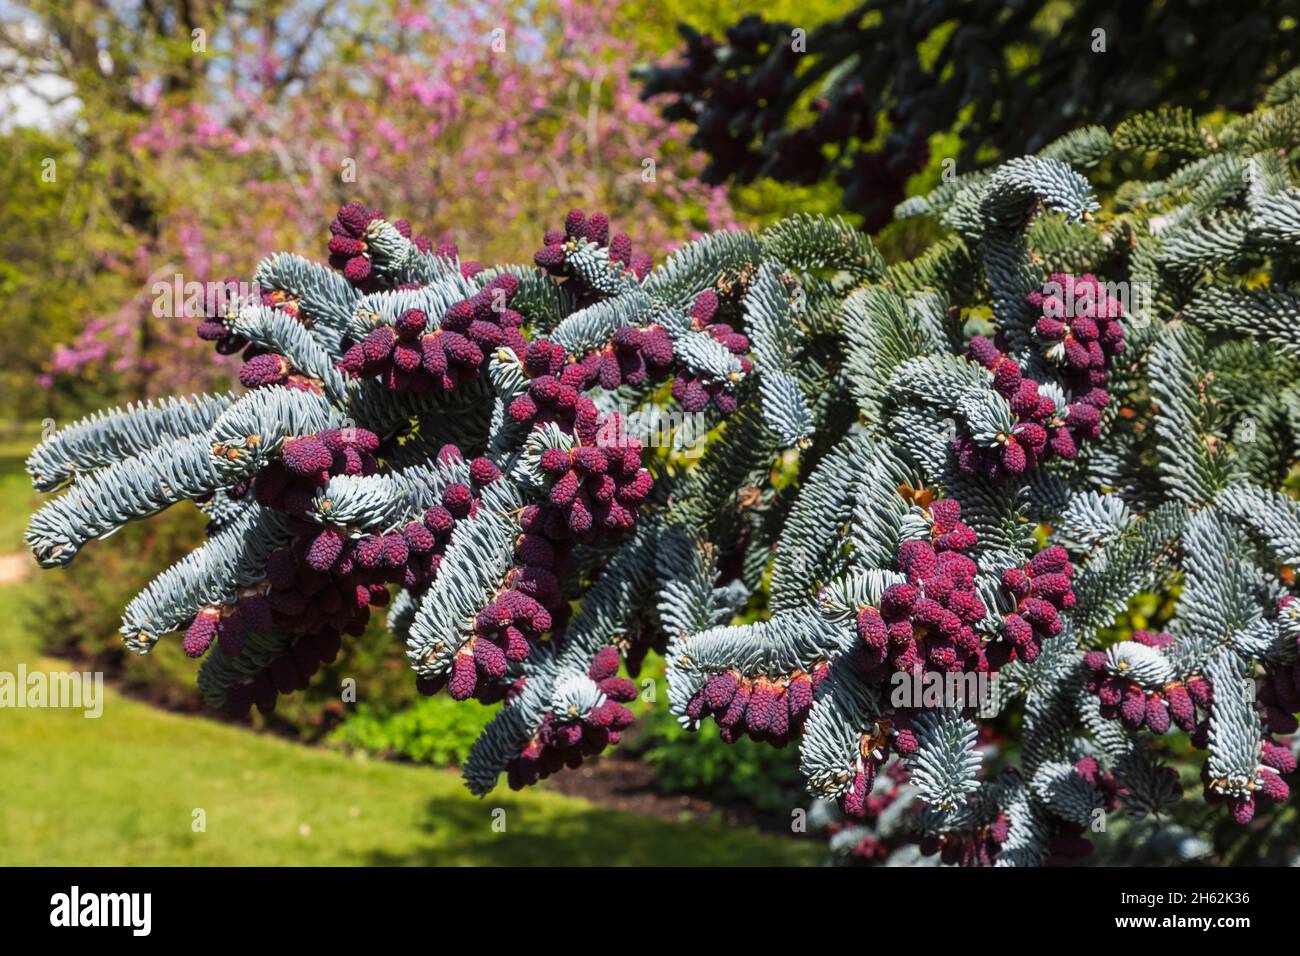 england,isle of wight,east cowes,osborne house,the palatial former home of queen victoria and prince albert,detail of tree branch in flower Stock Photo